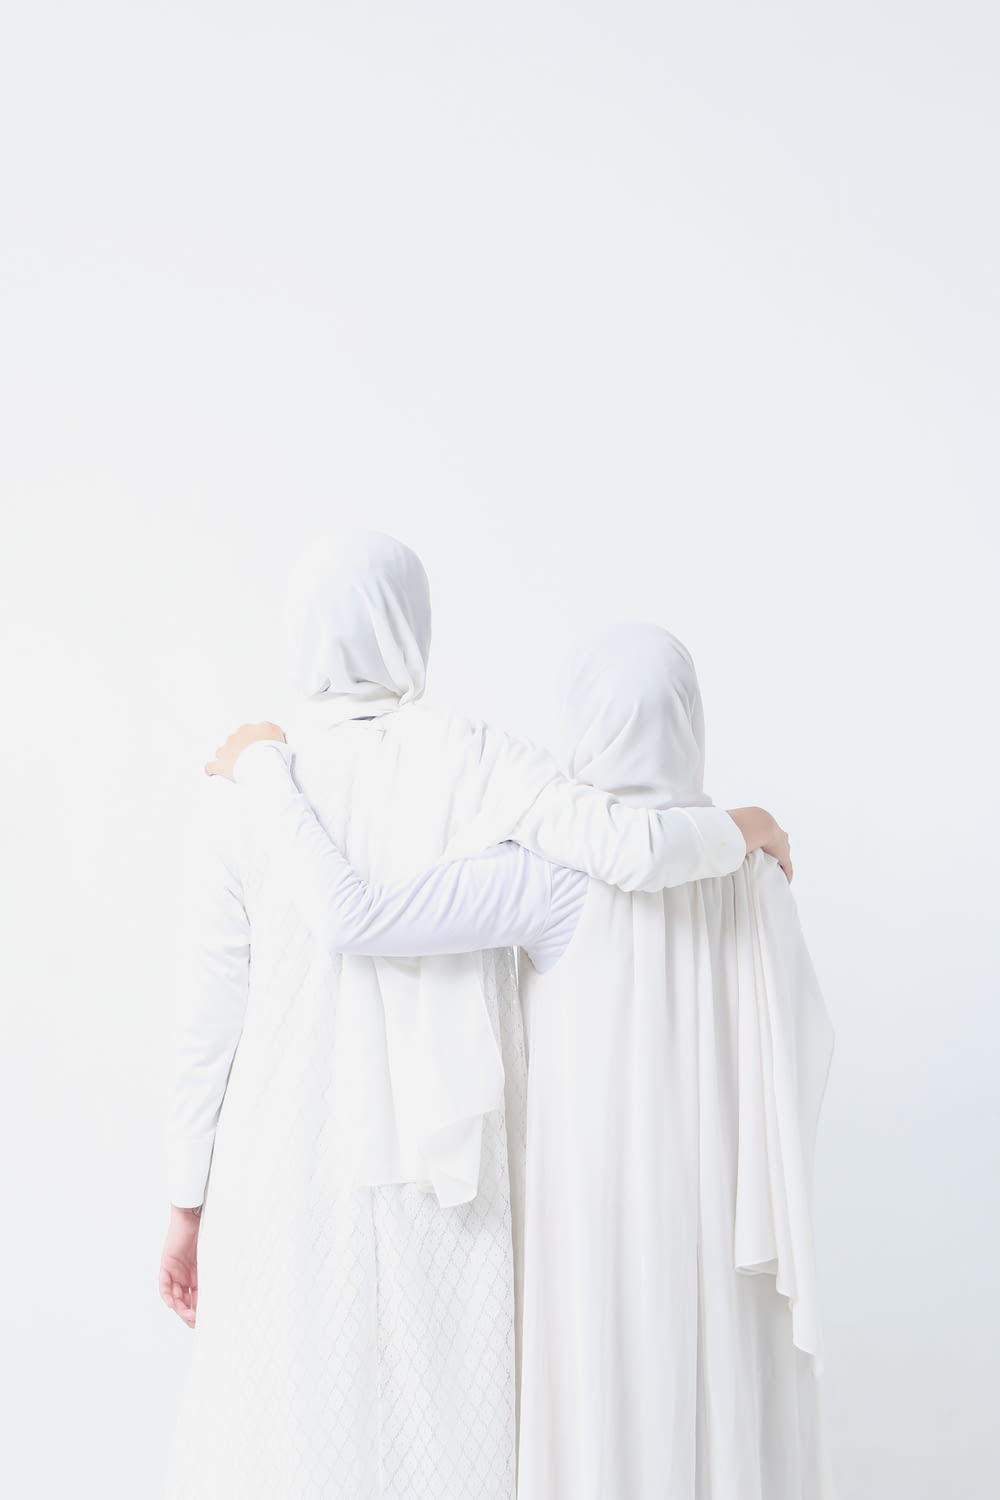 two women dressed in white standing next to each other